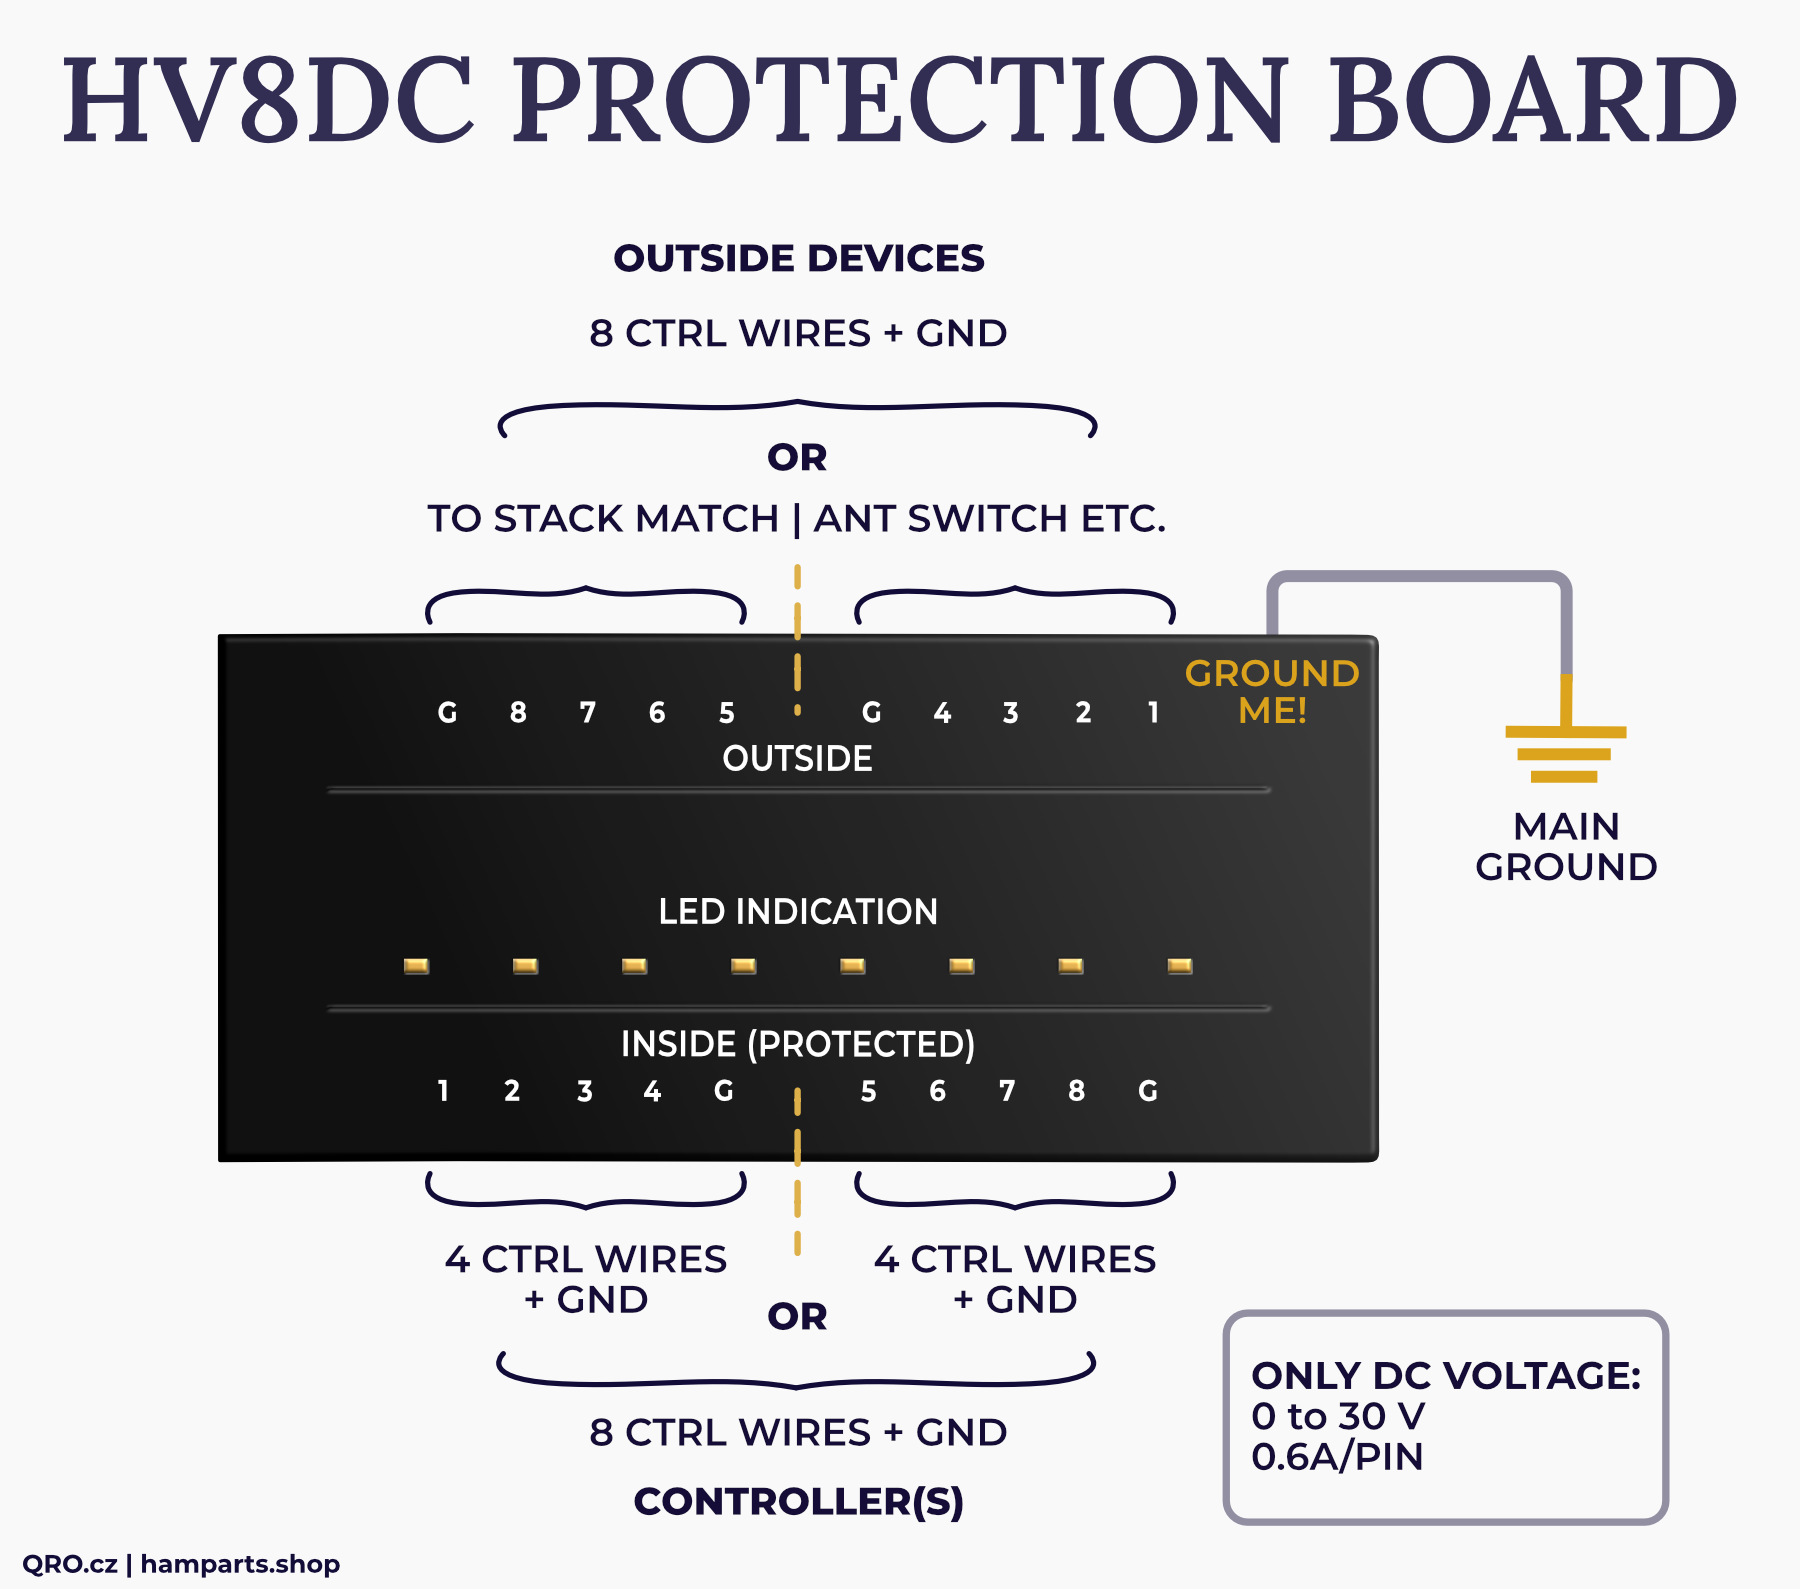 hv8dc protection board by qro.cz hamparts.shop